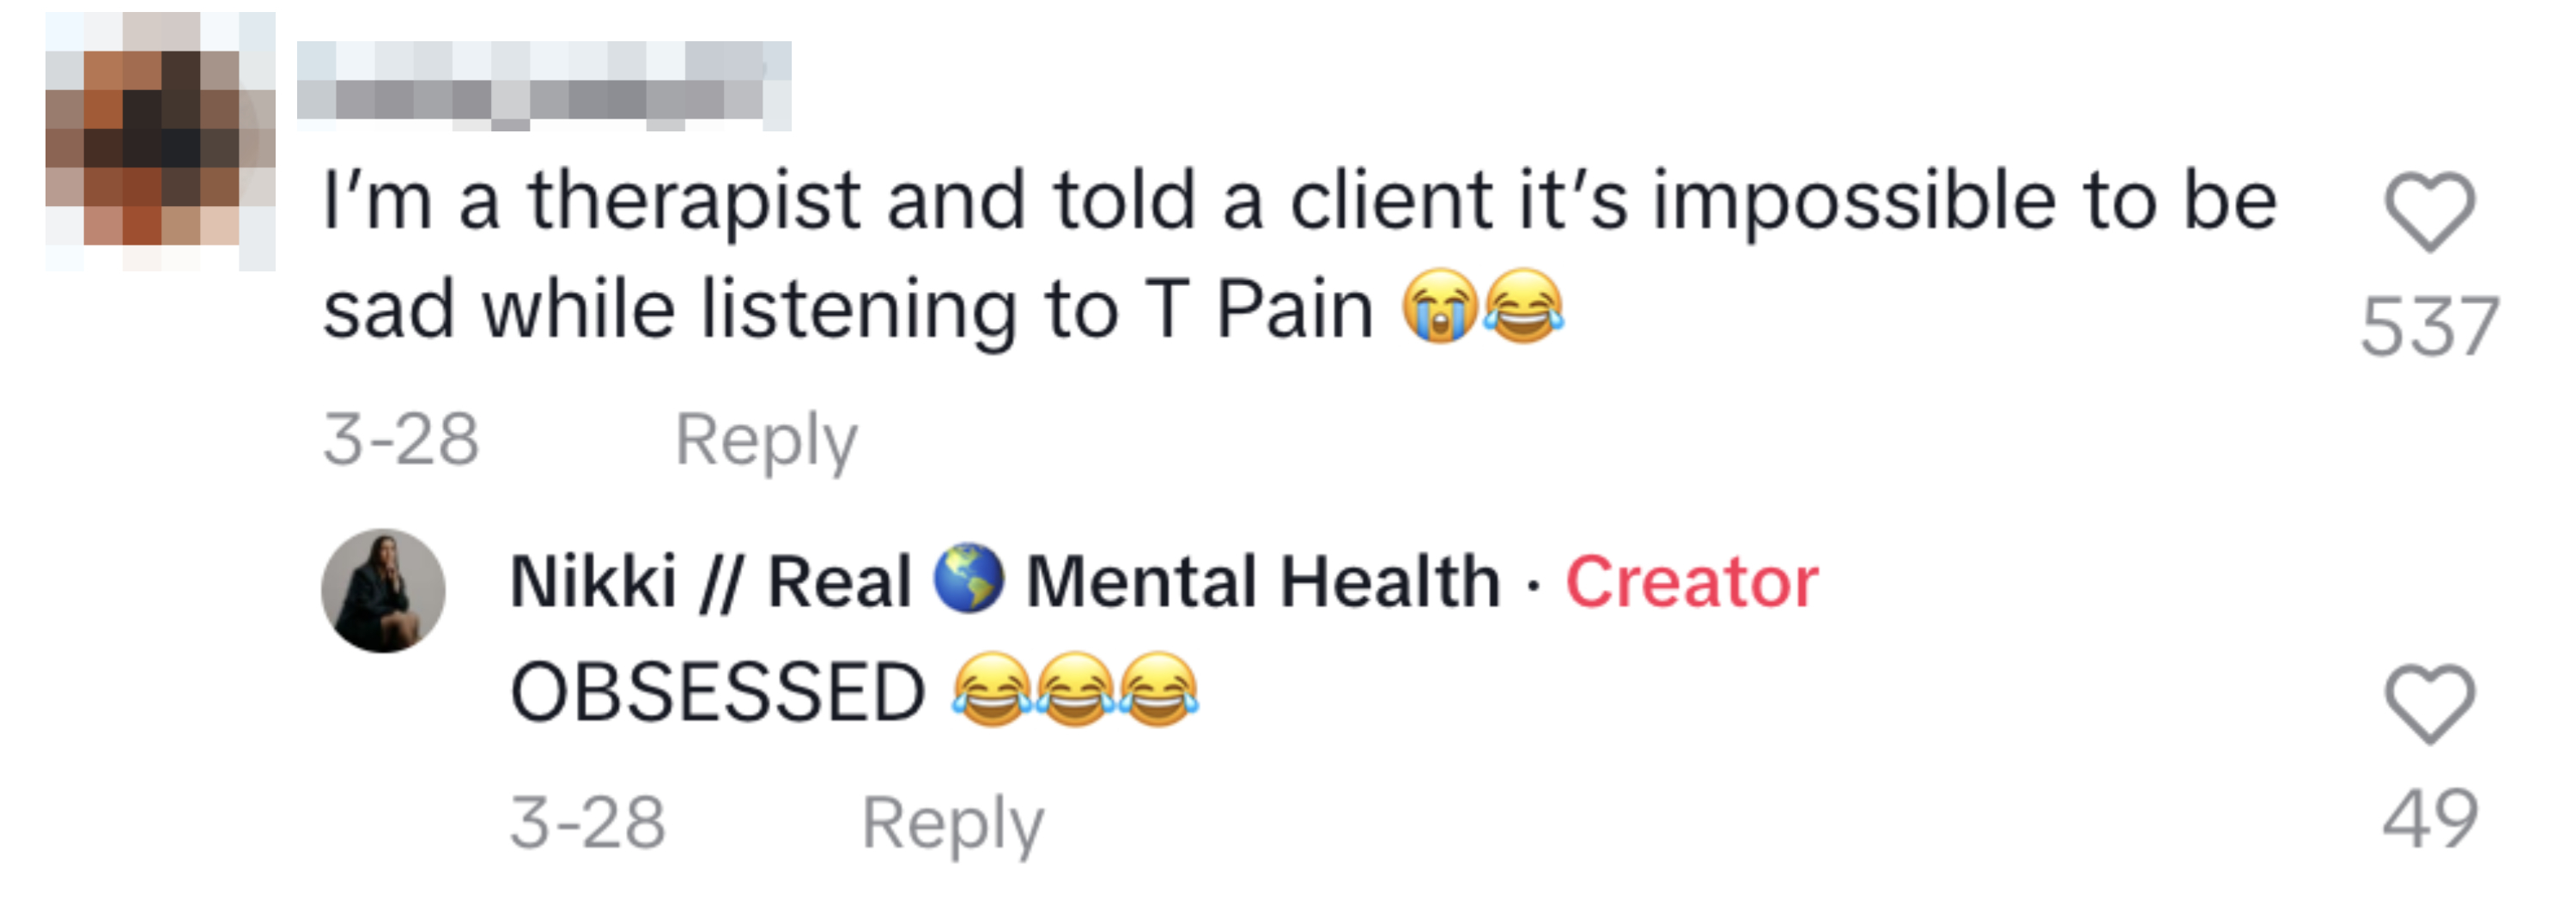 Two social media comments; the first shares a therapist&#x27;s humorous advice to listen to T-Pain, and the second user expressing amusement